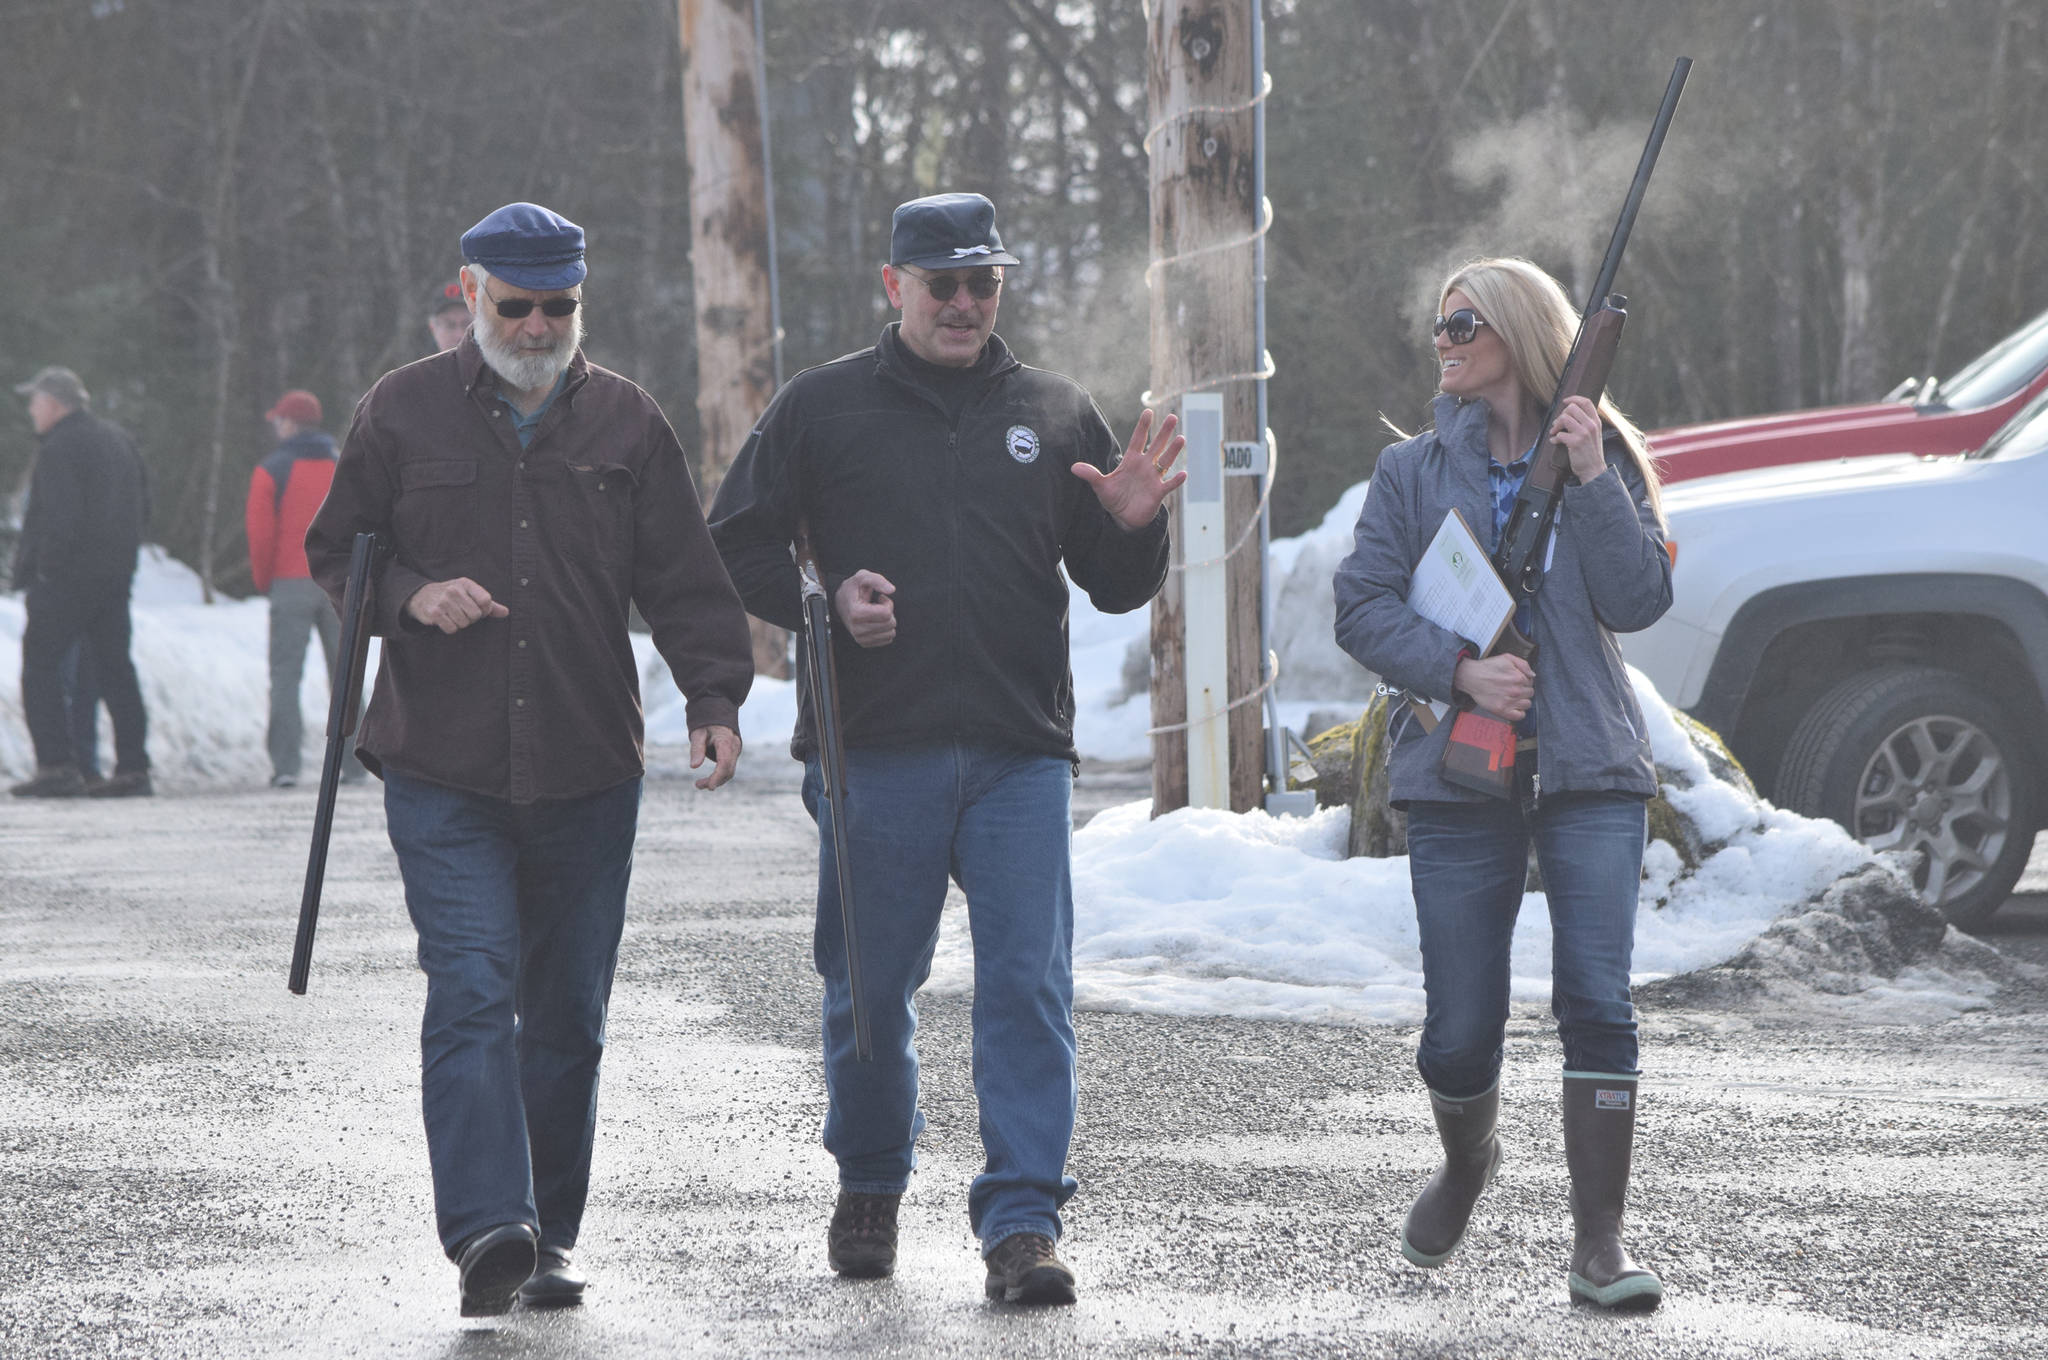 From left to right, Rep. Paul Seaton, R-Homer; Sen. Click Bishop, R-Fairbanks; and Brittany Hartman talk on a foggy morning after finishing the shotgun portion of the 21st annual Legislative Shoot on Saturday, March 17, 2018 at the Juneau Gun Club. (James Brooks | Juneau Empire)